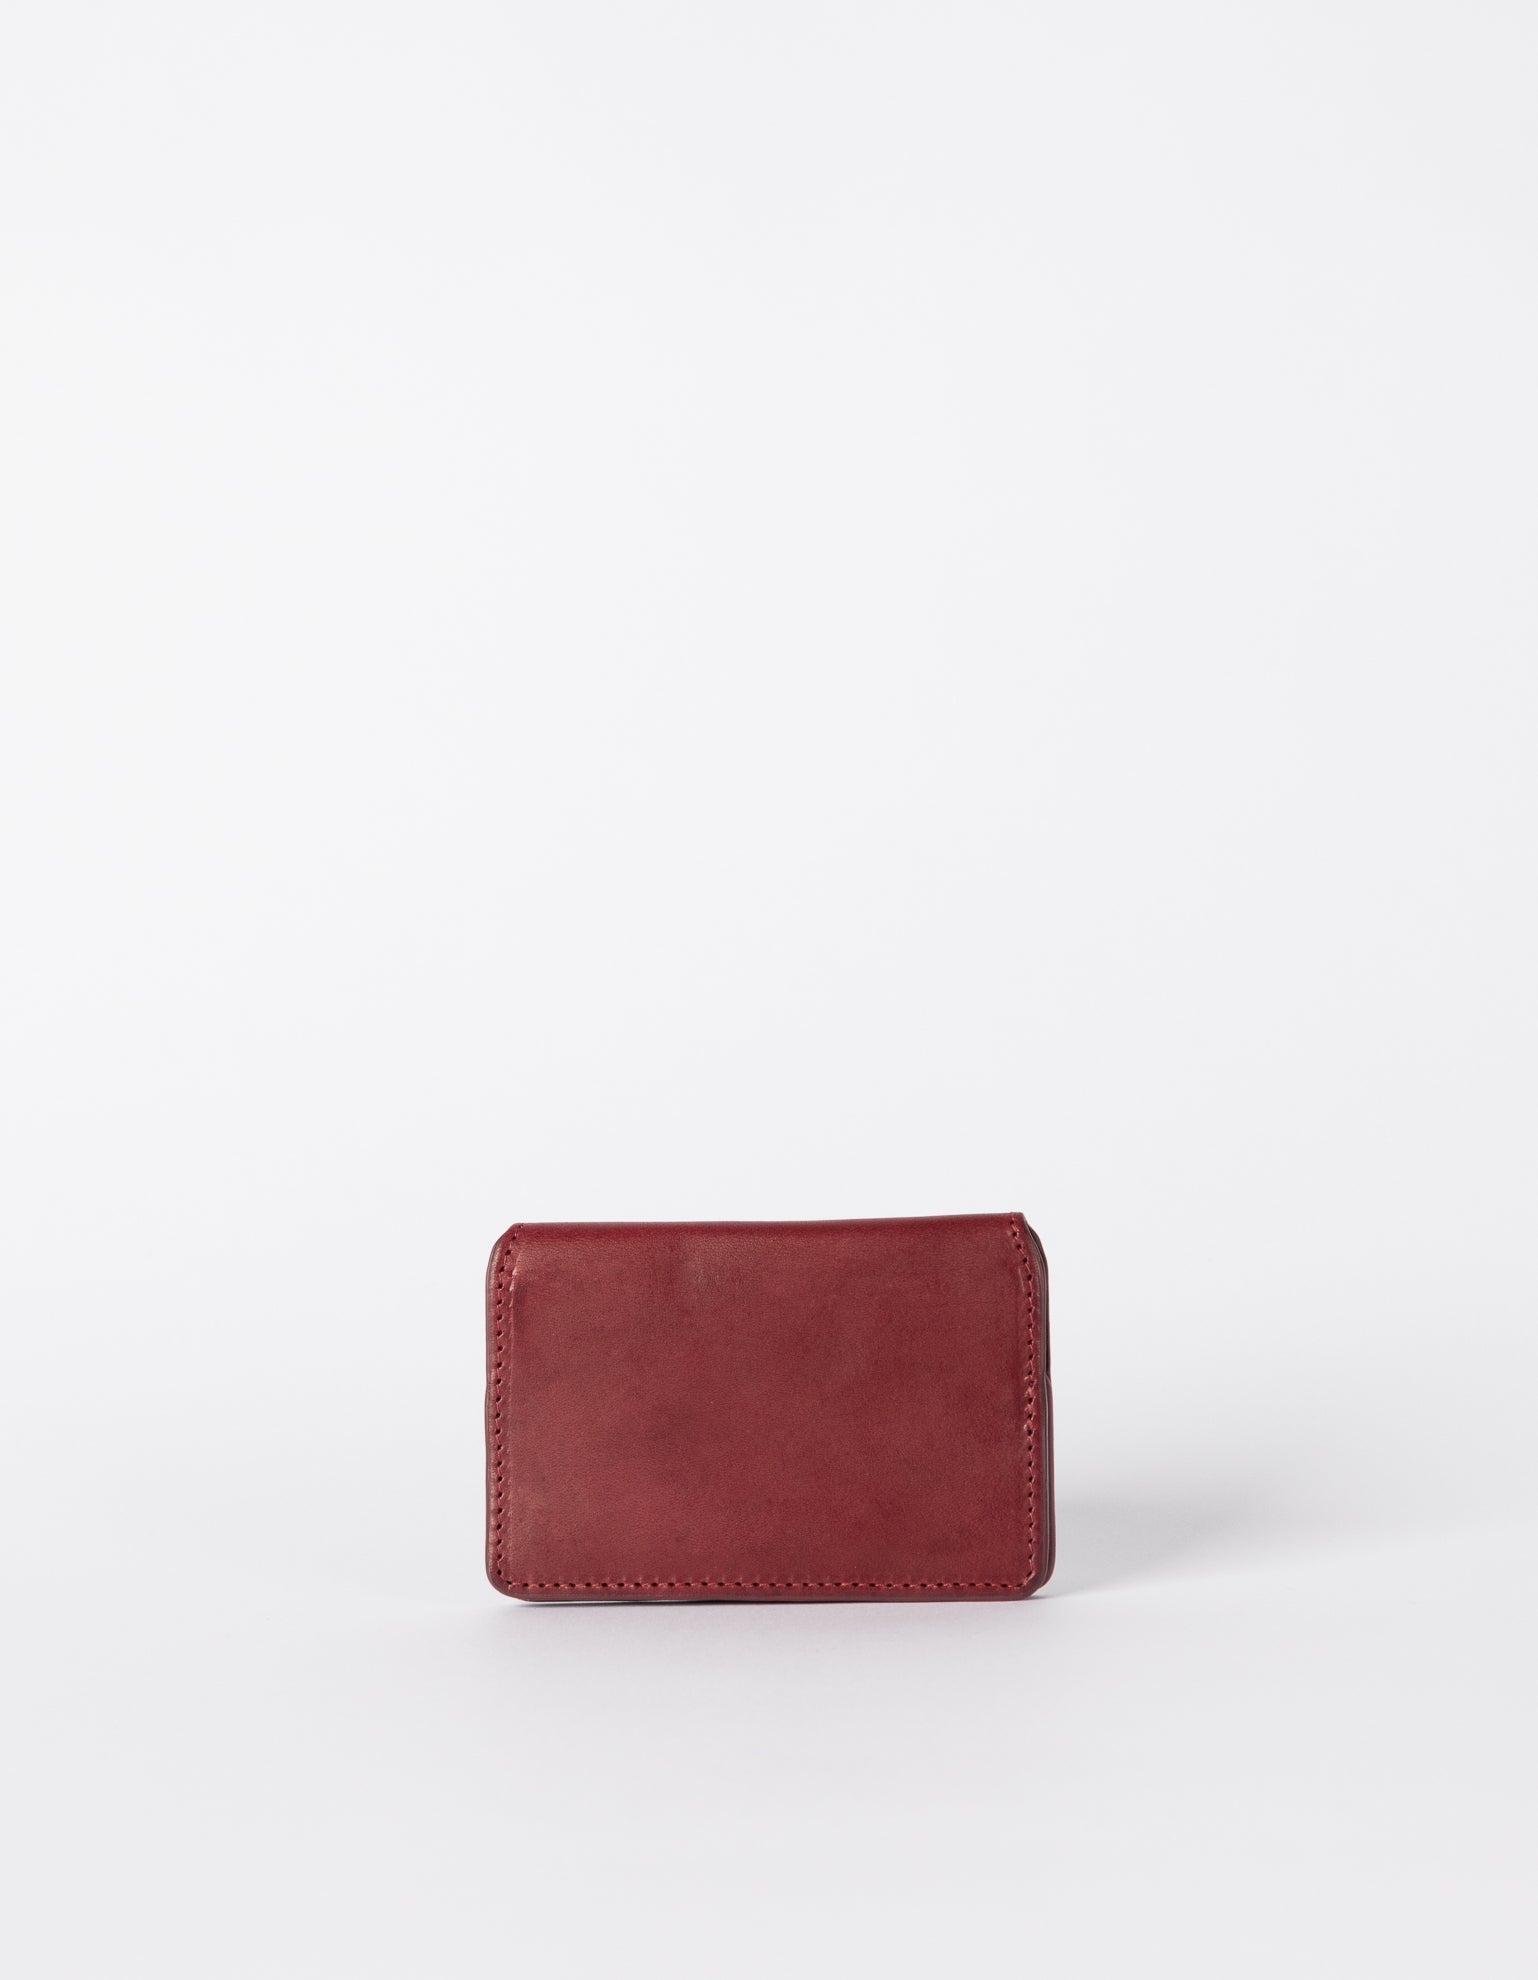 Small Ruby card case. Square shape. Back image